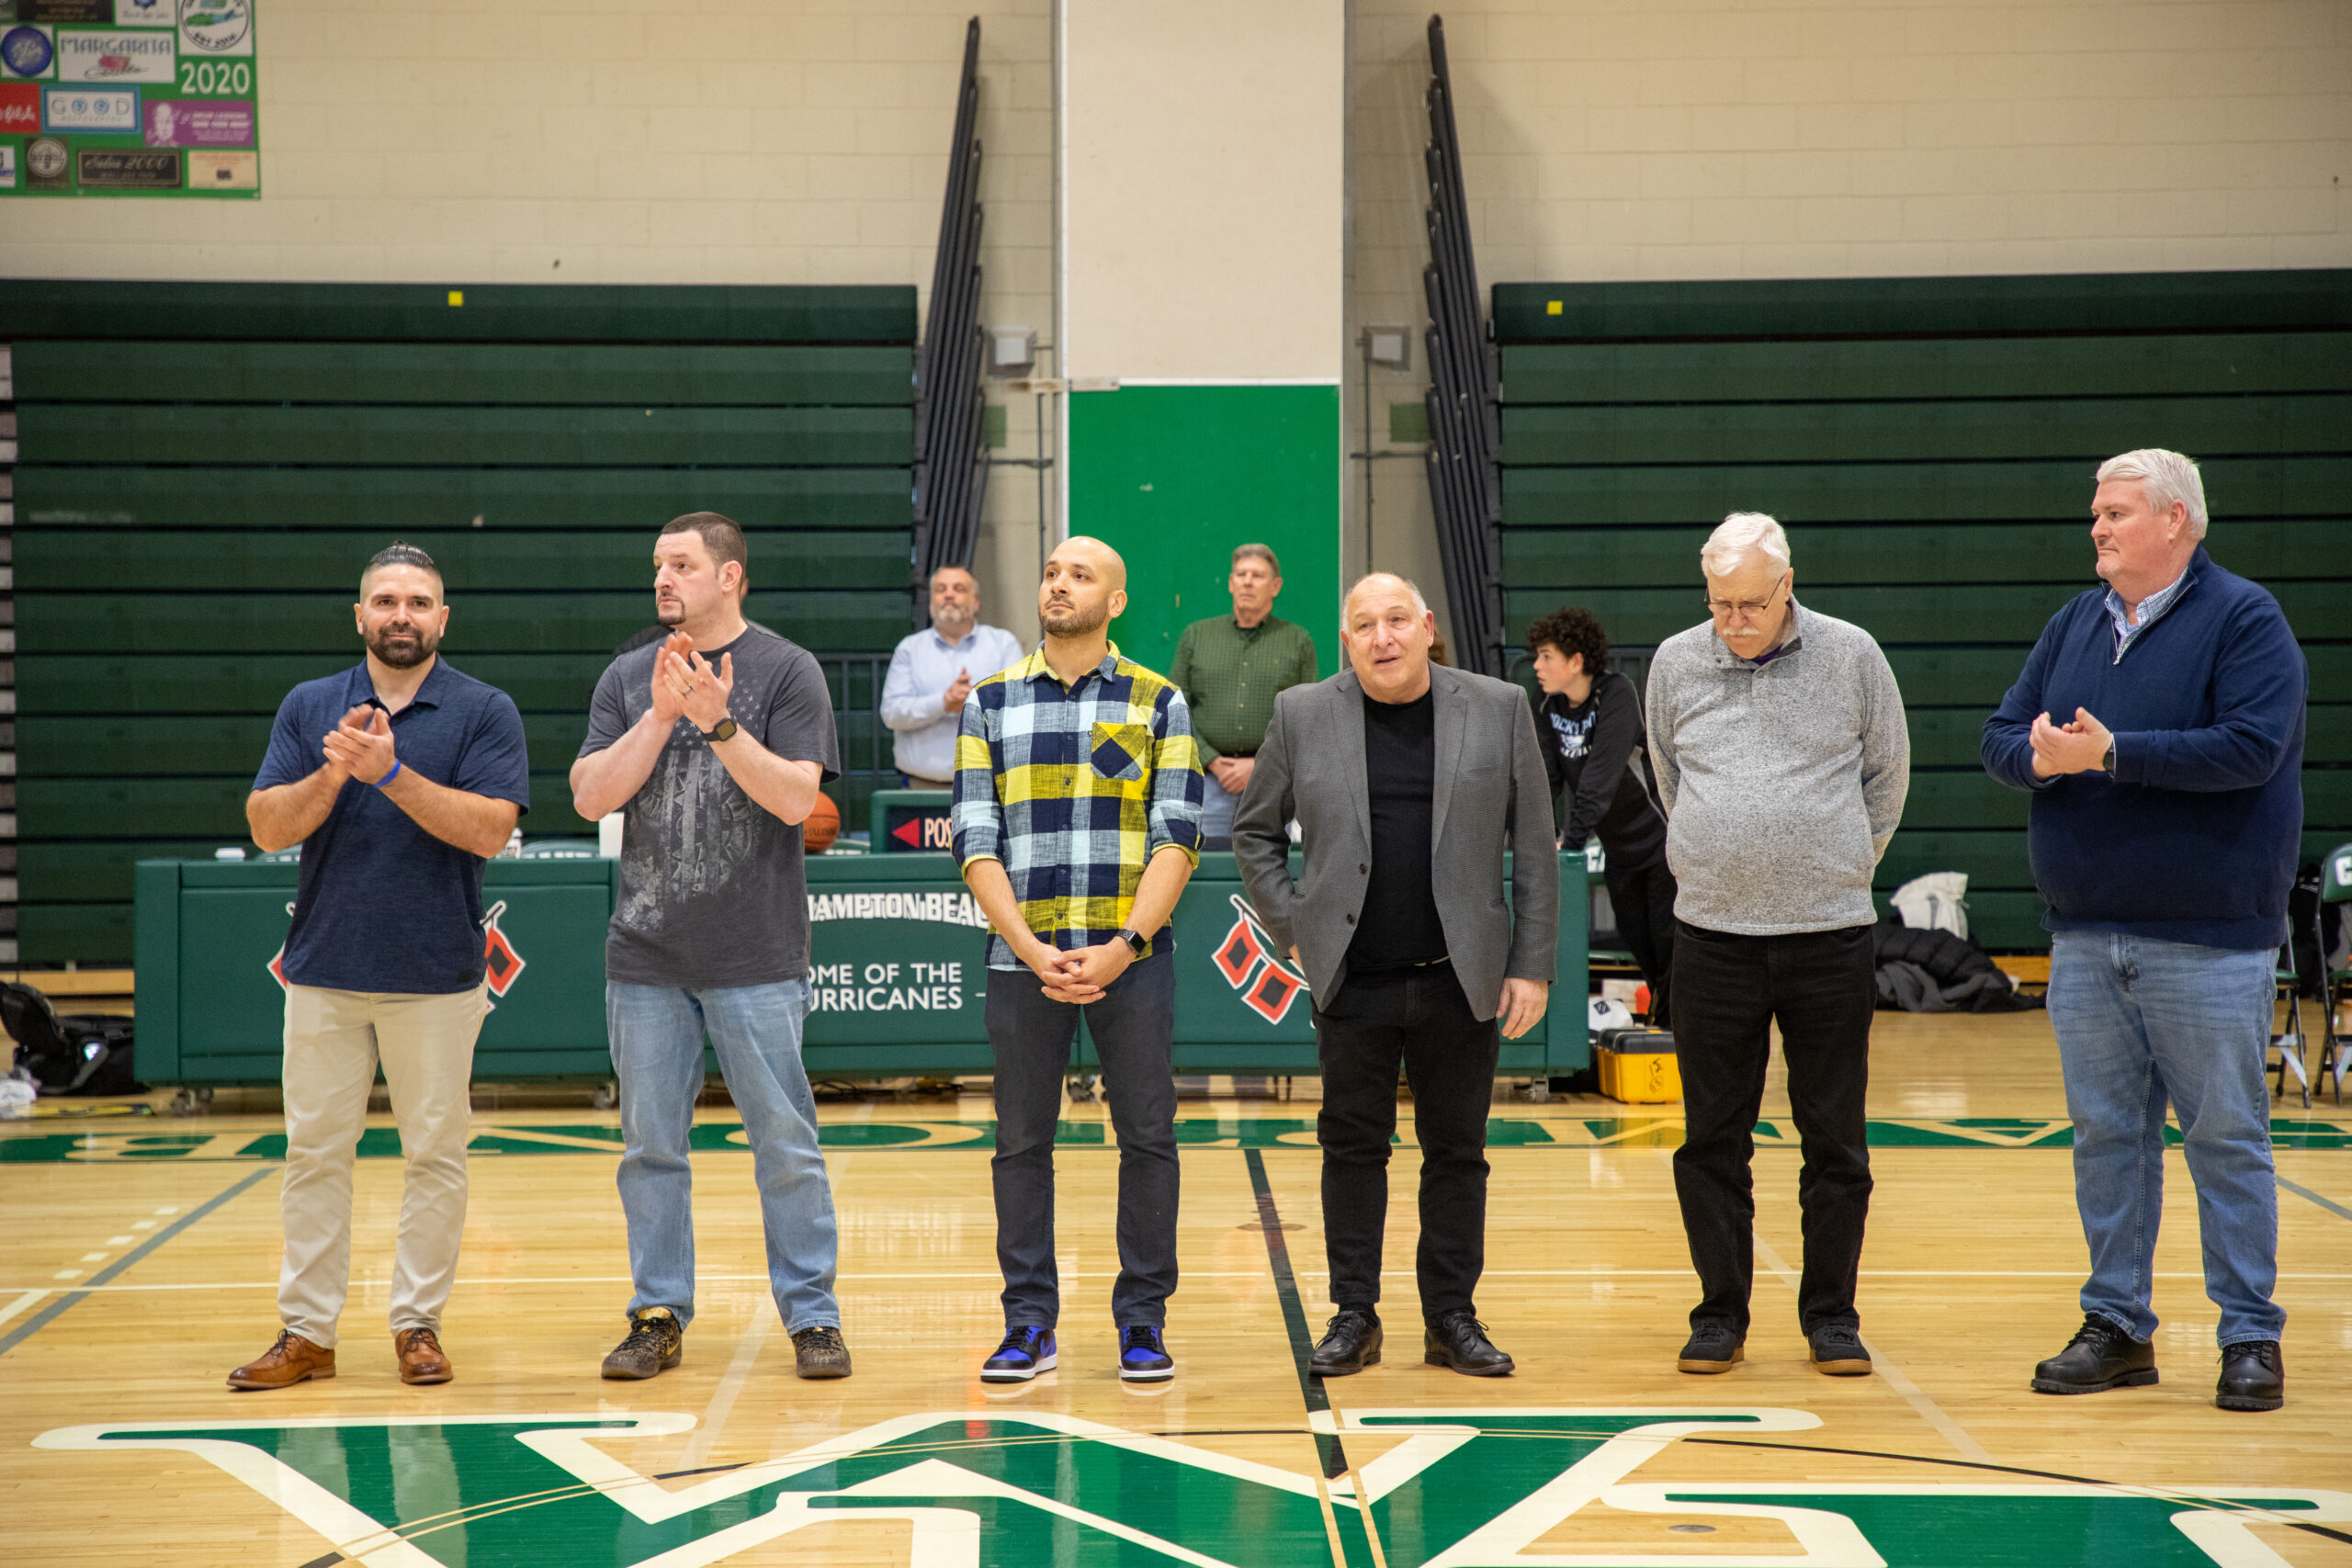 On hand Thursday night as part of a celebration of the 25th anniversary of the 1997-1998 team was, from left, players Dale Menendez, Adam Kandell, Bronson Martin and coaches Jack Vivonetto, Rich Wrase and Bill Hempfling.   MICHAEL O'CONNOR